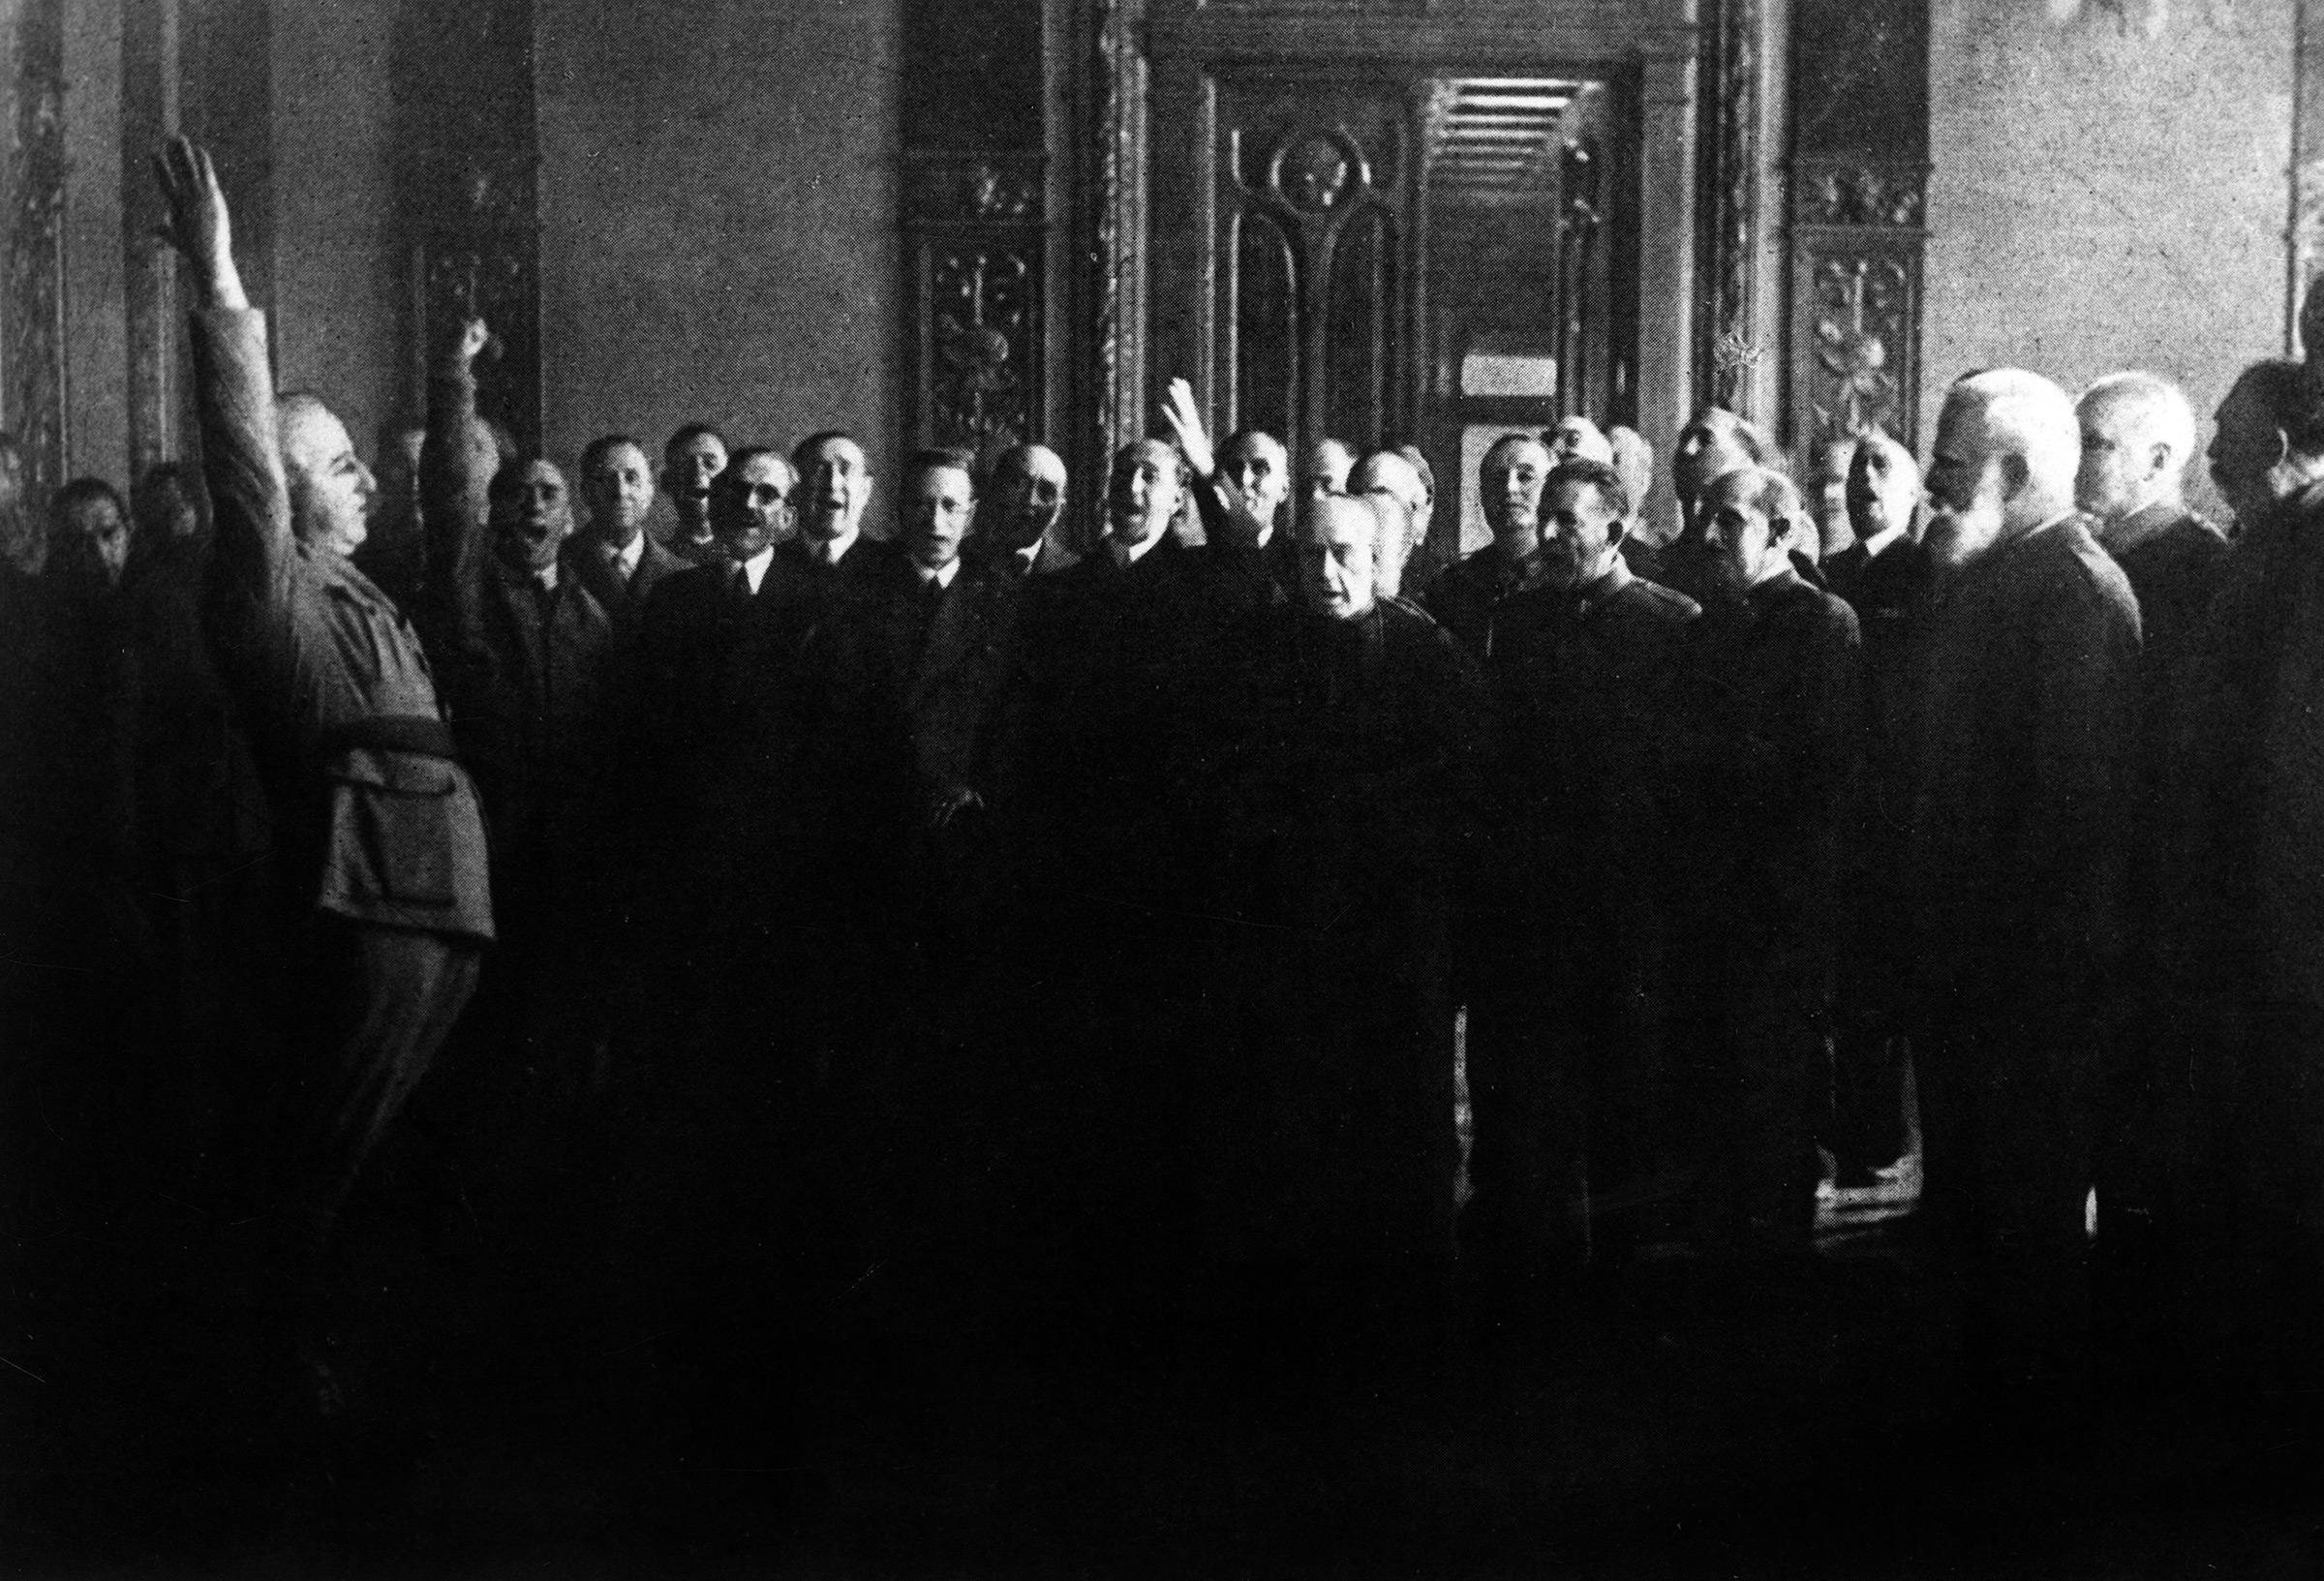 General Francisco Franco swearing allegiance to Spain in Oct. 1936. (Mondadori/Getty Images)